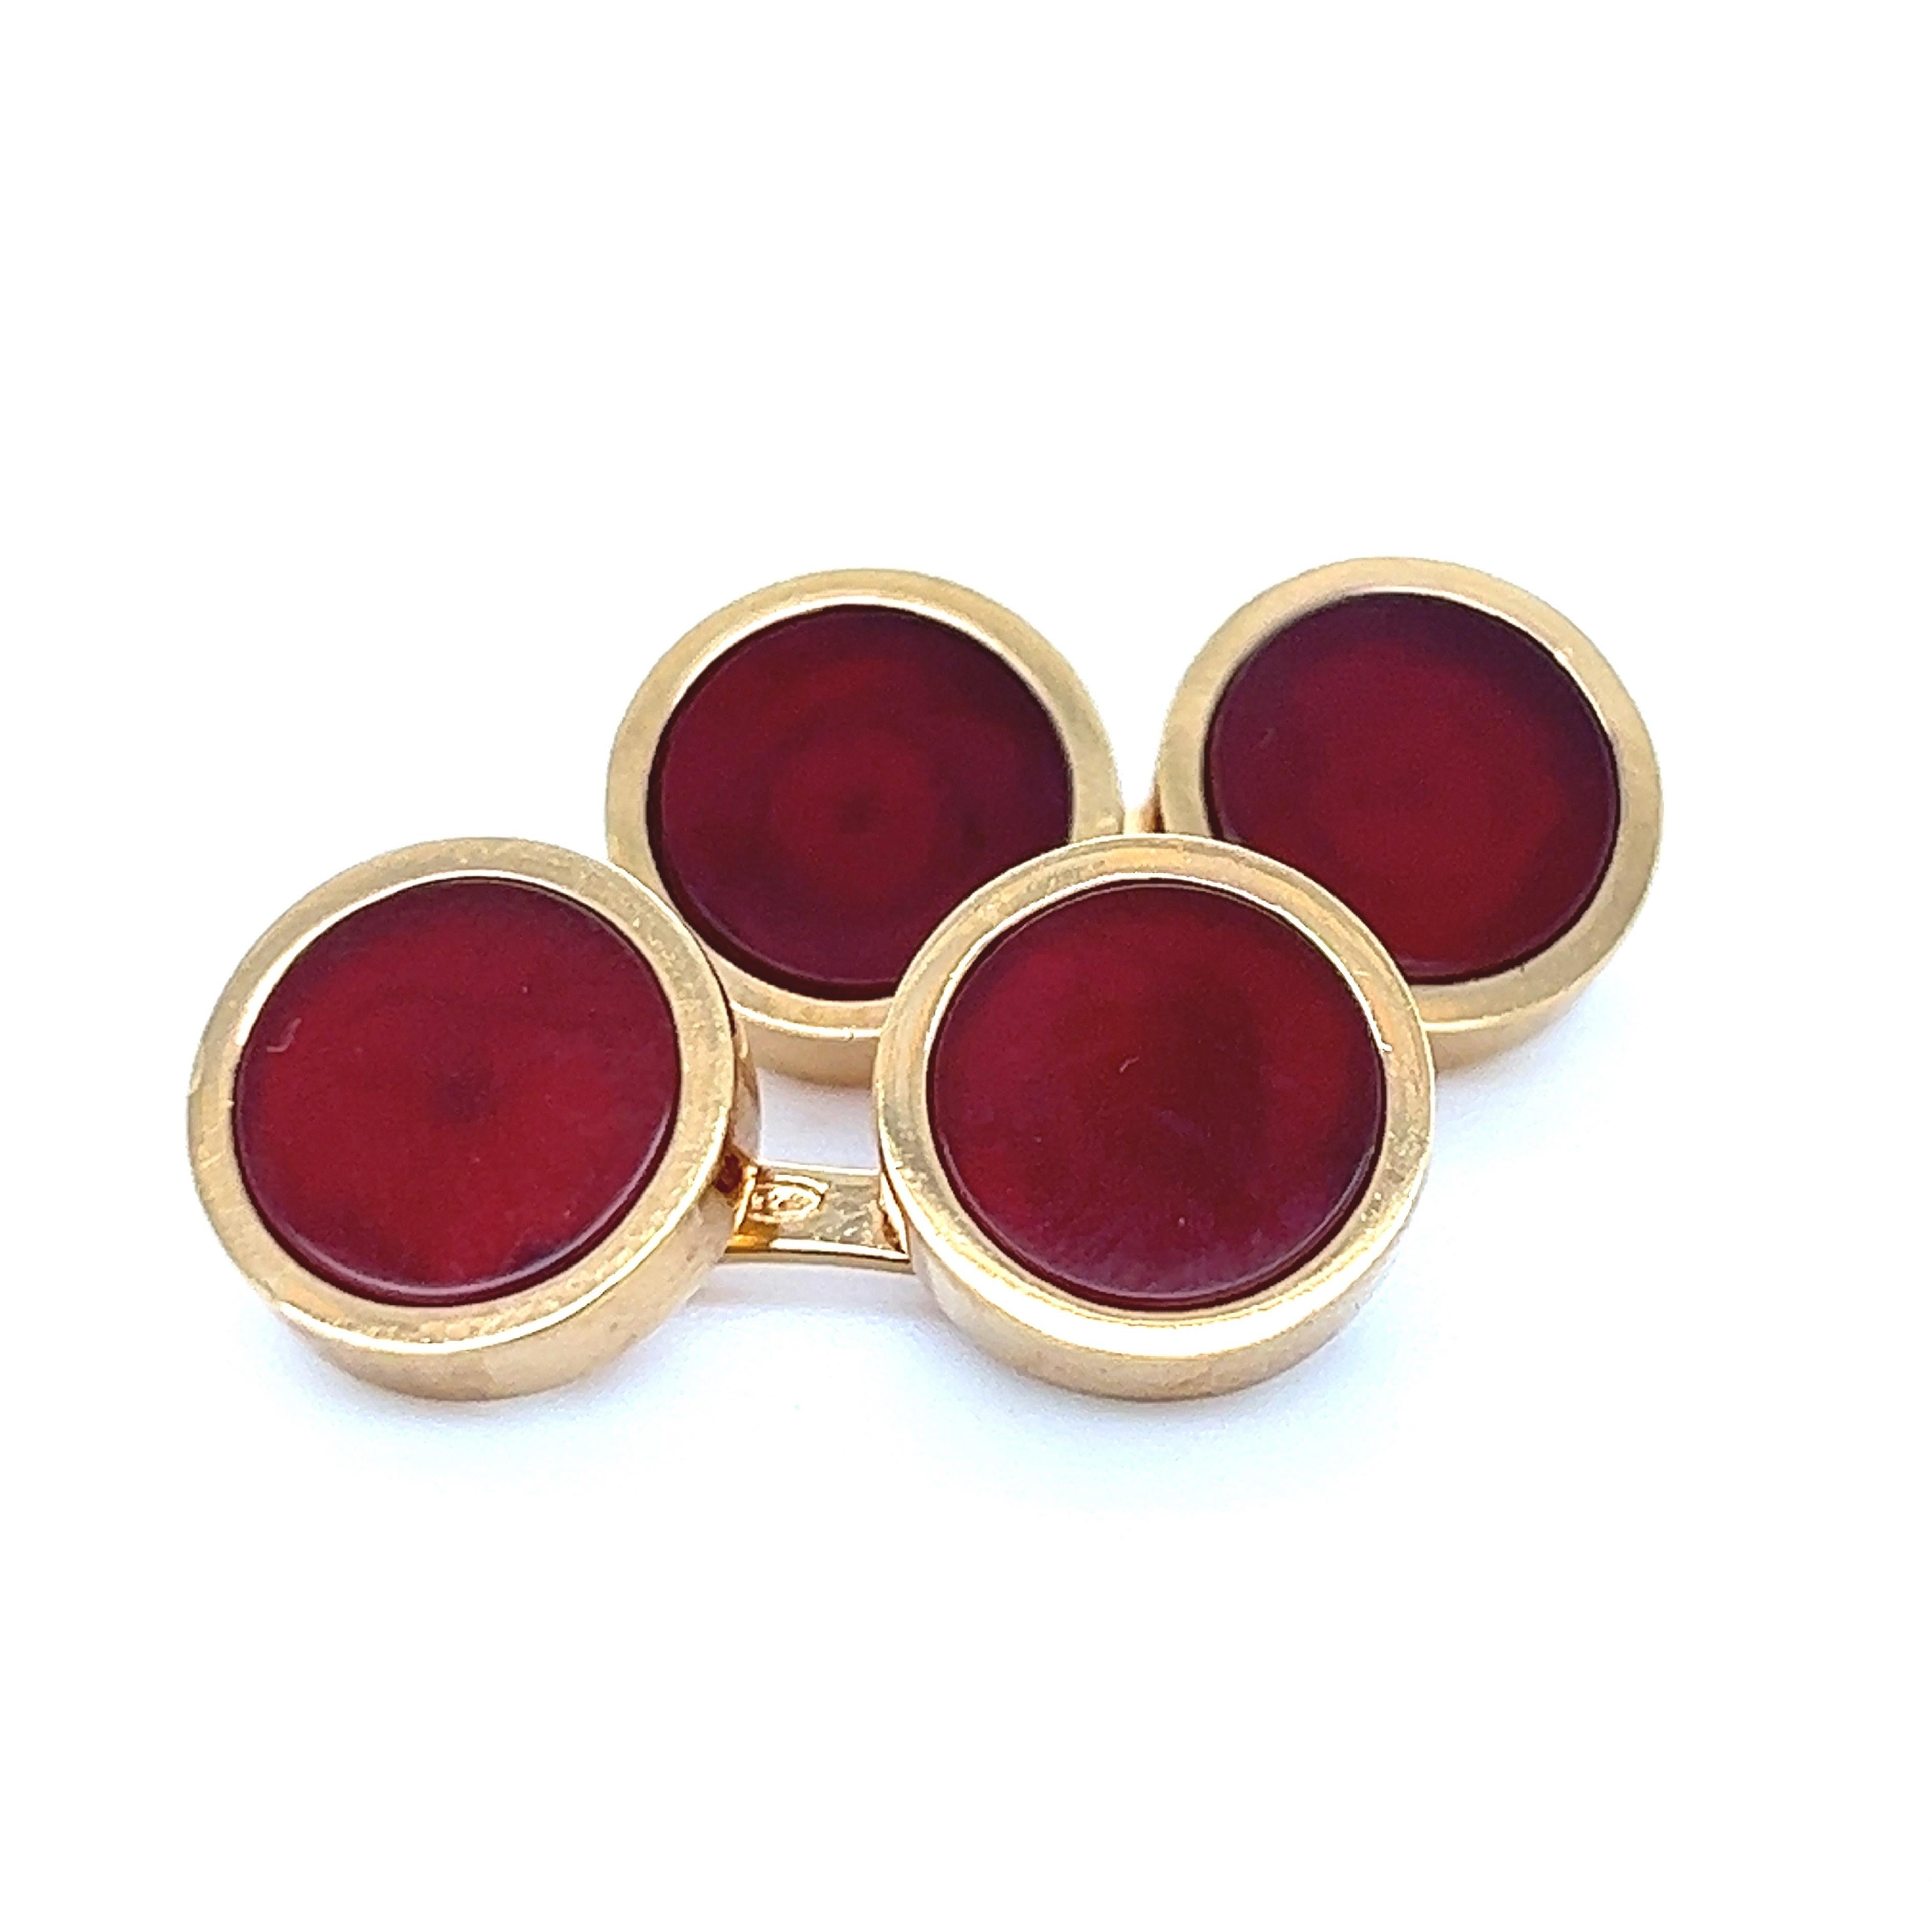 Chic and Timeless, Natural Hand Inlaid Red Carnelian Disk Round Shaped Sterling Silver Gold Plated Cufflinks.
In our smart fitted Tobacco Suede Leather Case and Pouch.

